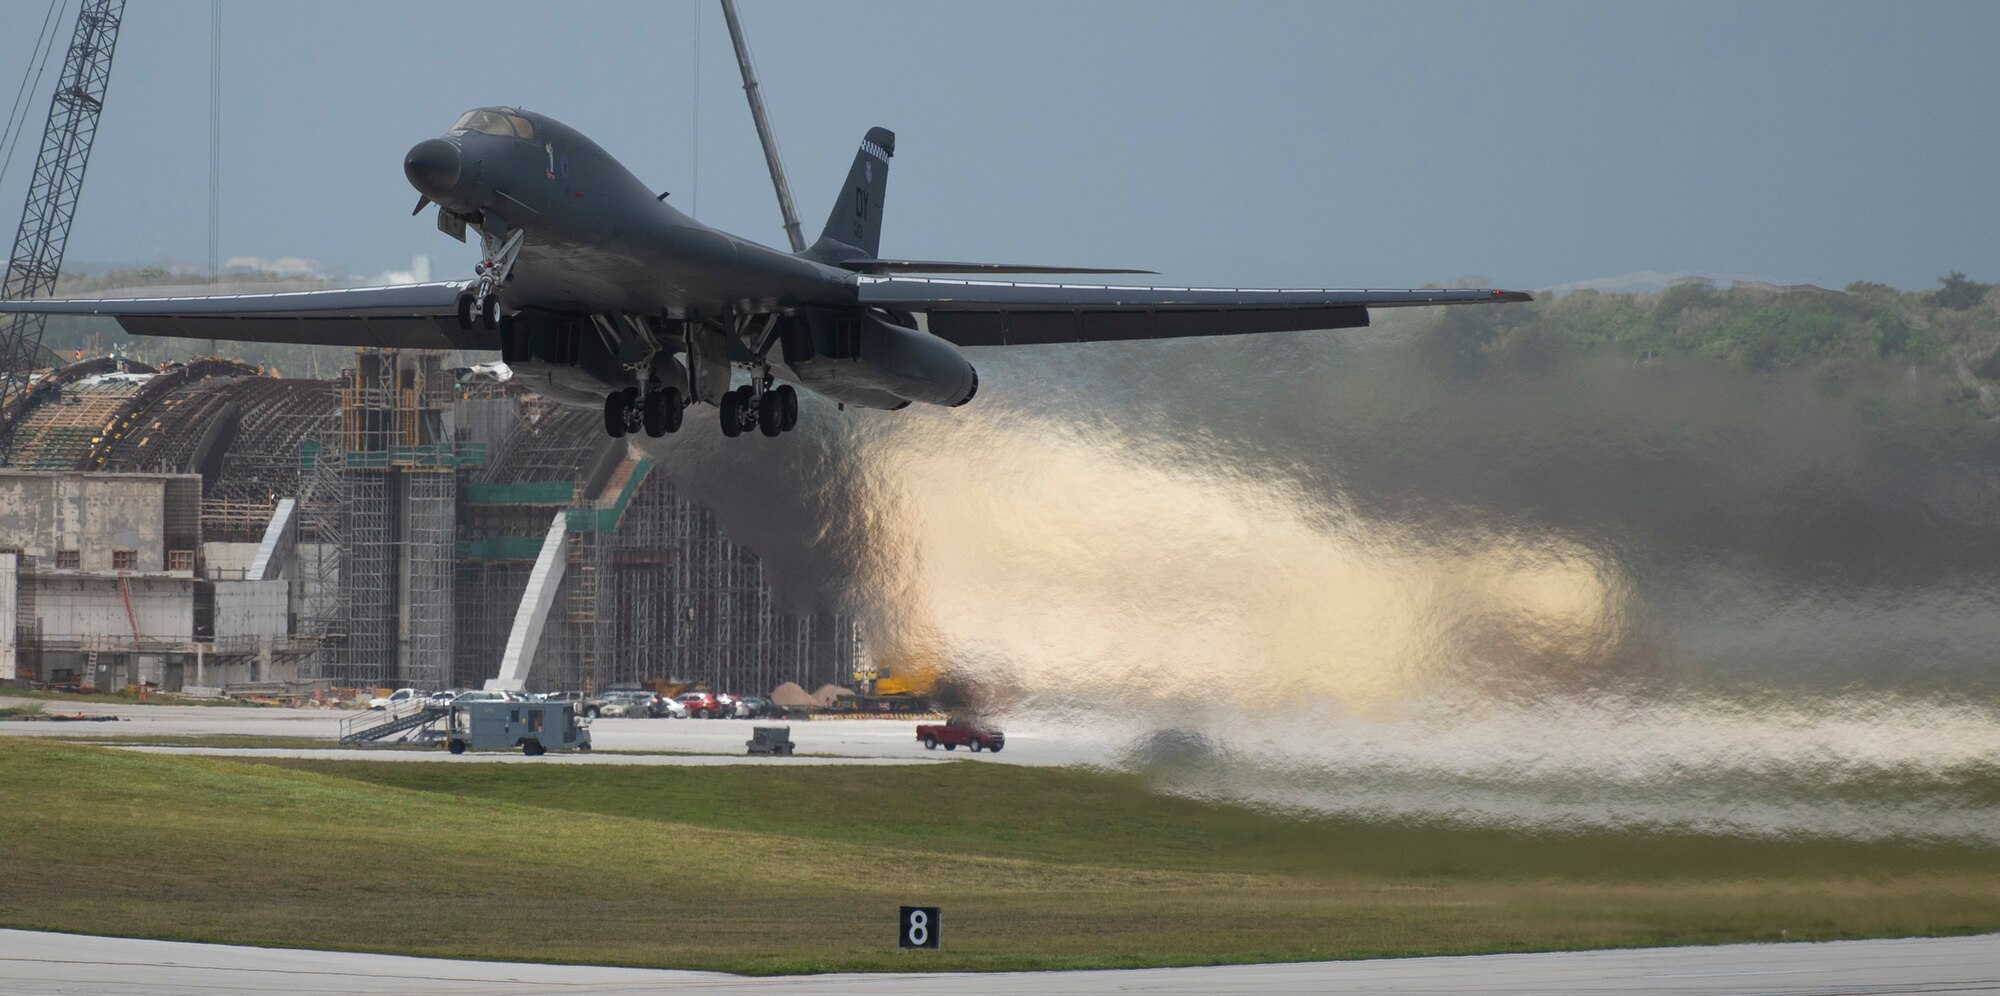 A 9th Expeditionary Bomb Squadron B-1B Lancer takes off at Andersen Air Force Base, Guam, May 4, 2020, to conduct a training mission in the East China Sea in support of Pacific Air Forces’ training efforts and strategic deterrence missions to reinforce the rules-base international order in the Indo-Pacific region. (U.S. Air Force photo by Senior Airman River Bruce)